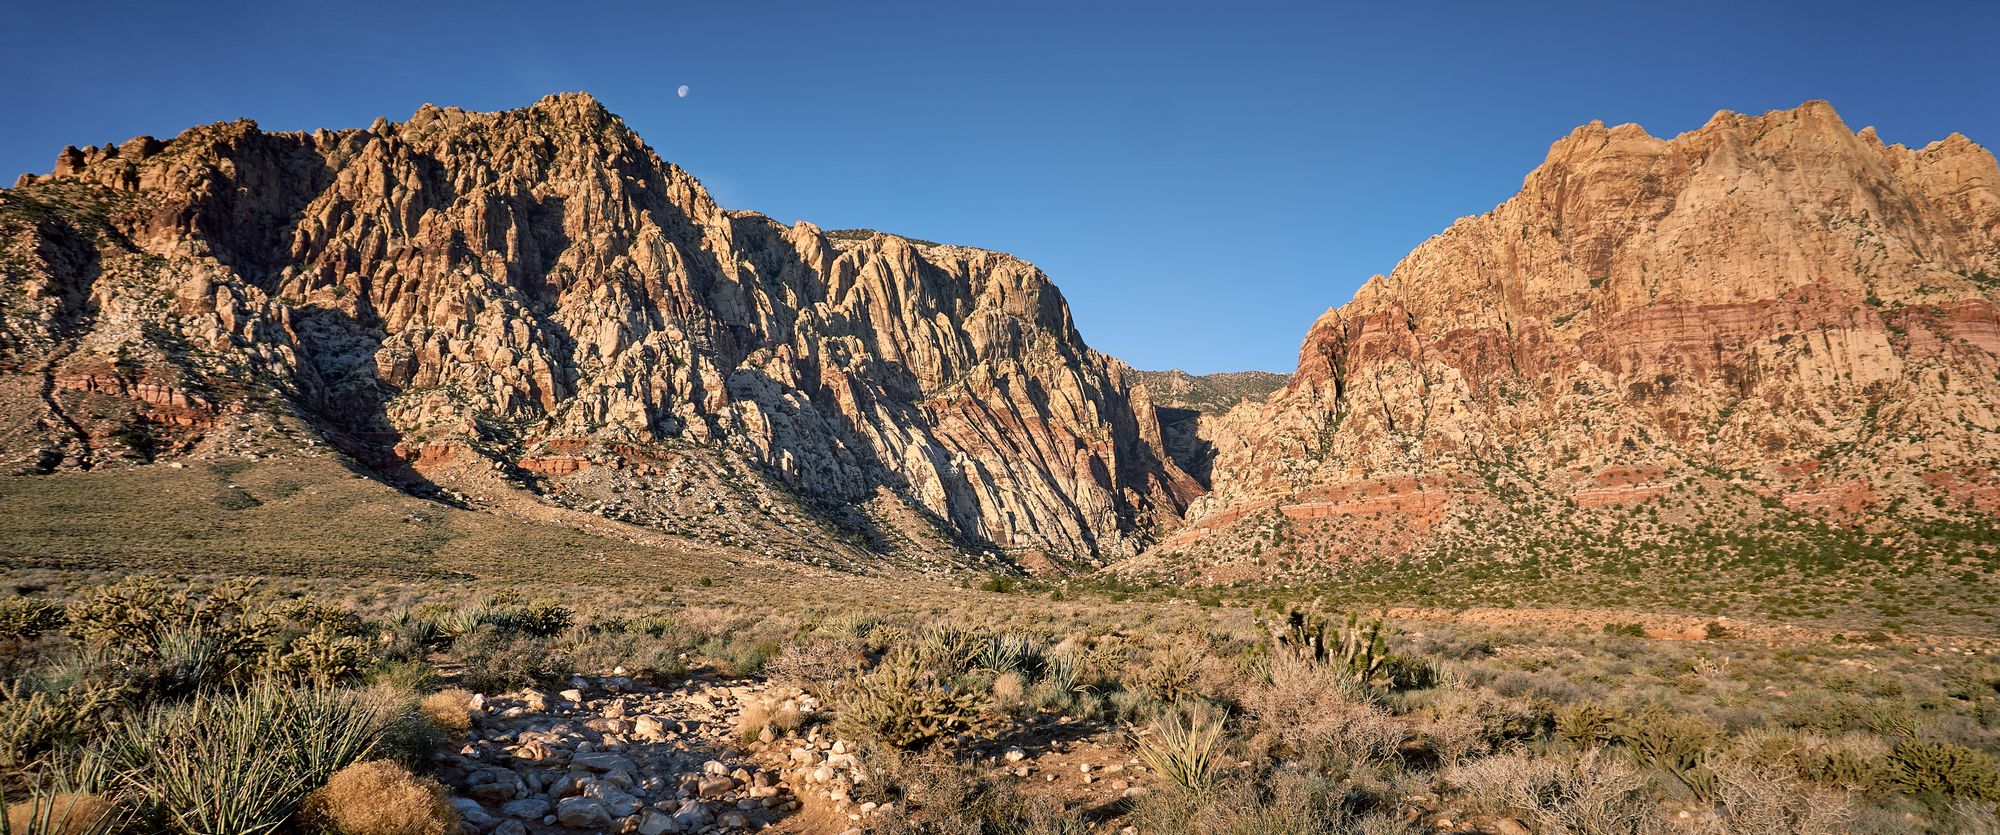 Landscape view of red rocks canyon. Center is a valley where hikers can traverse.